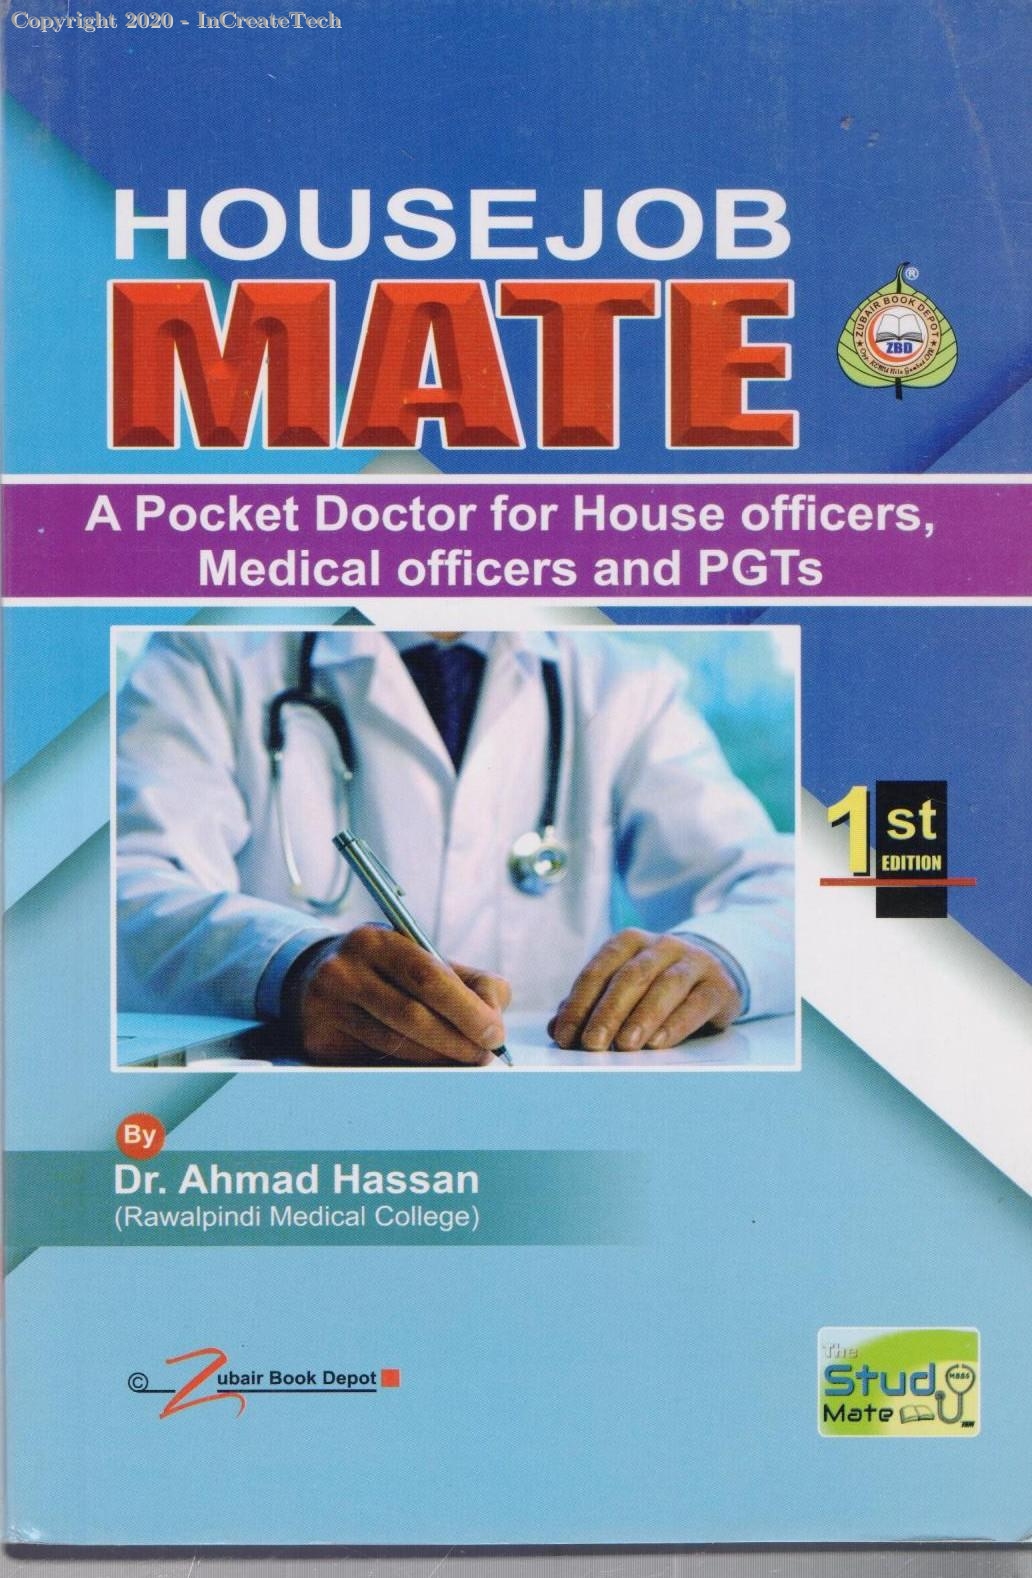 HouseJob Mate A Pocket Doctor for House Officers Medical Officers and PGTs